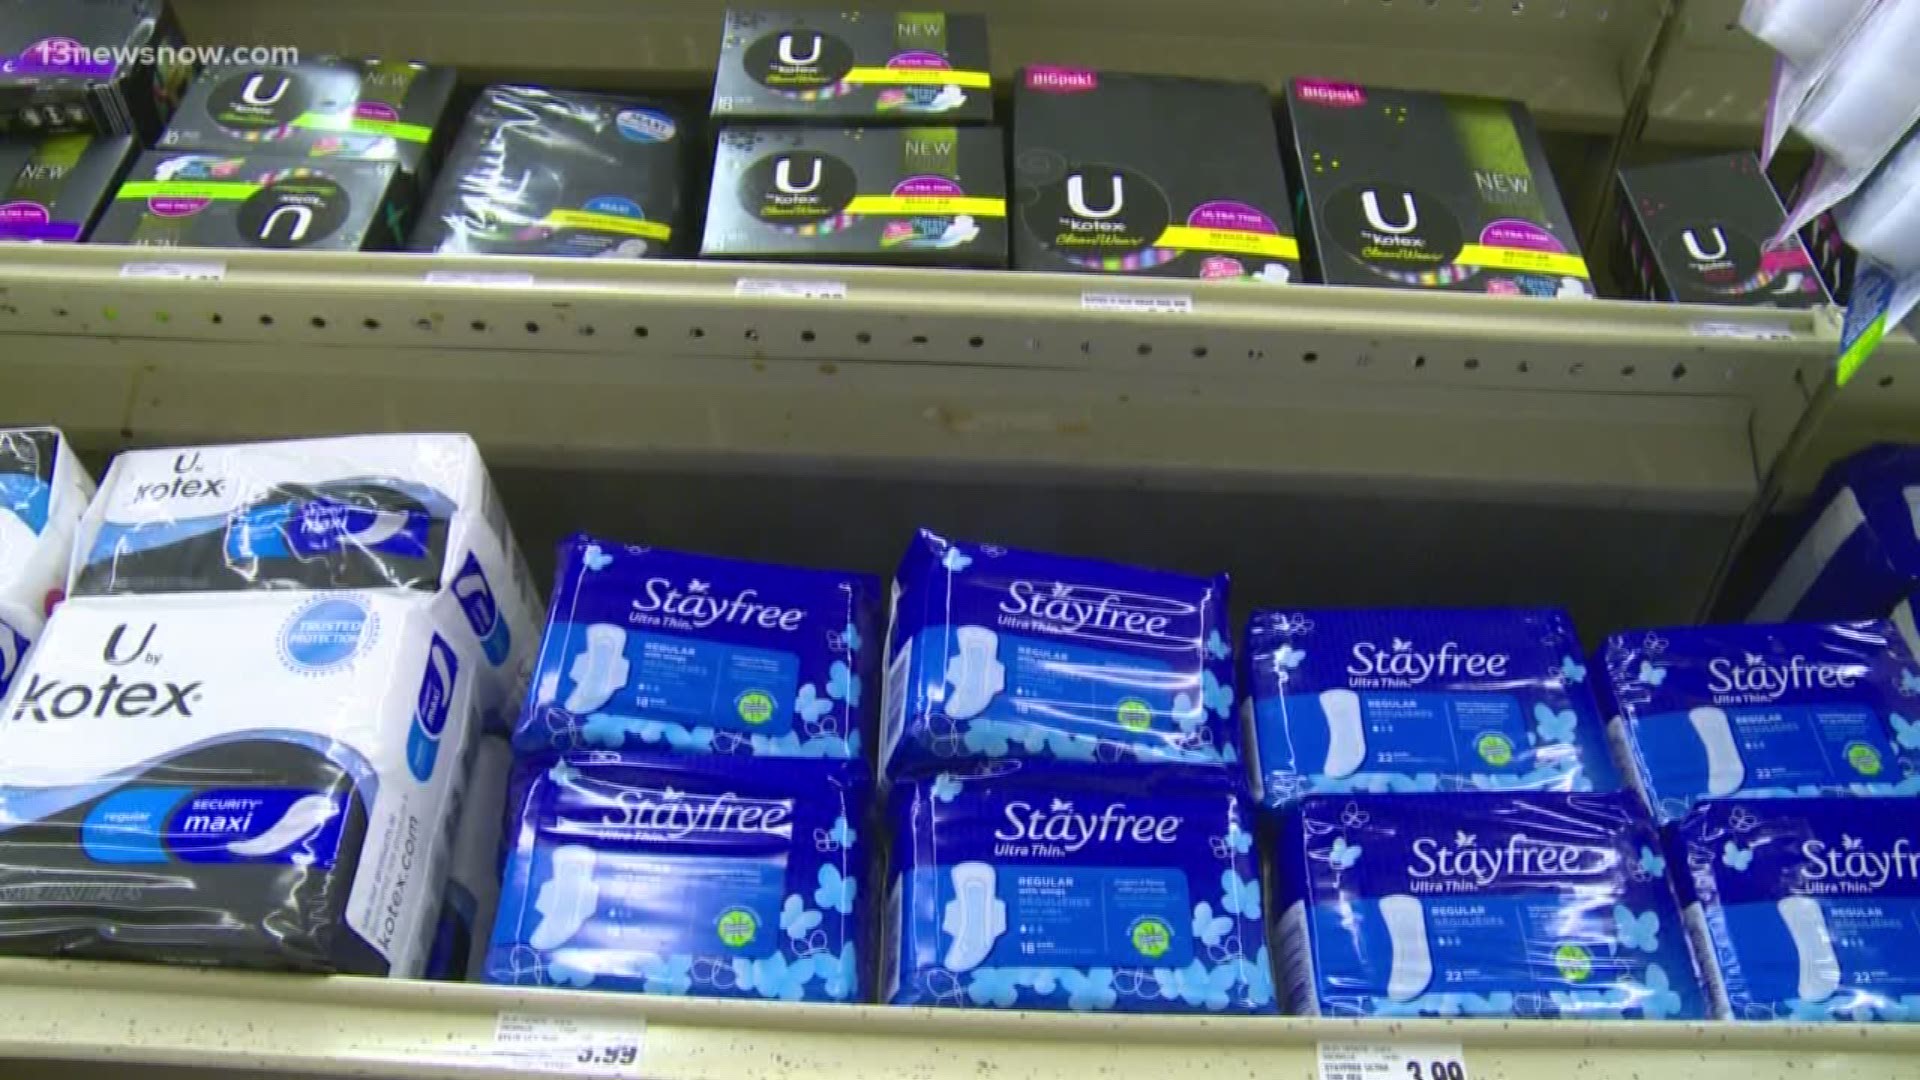 On Wednesday, Governor Ralph Northam signed a tax cut for feminine hygiene products. The tax cut also applies to diapers.